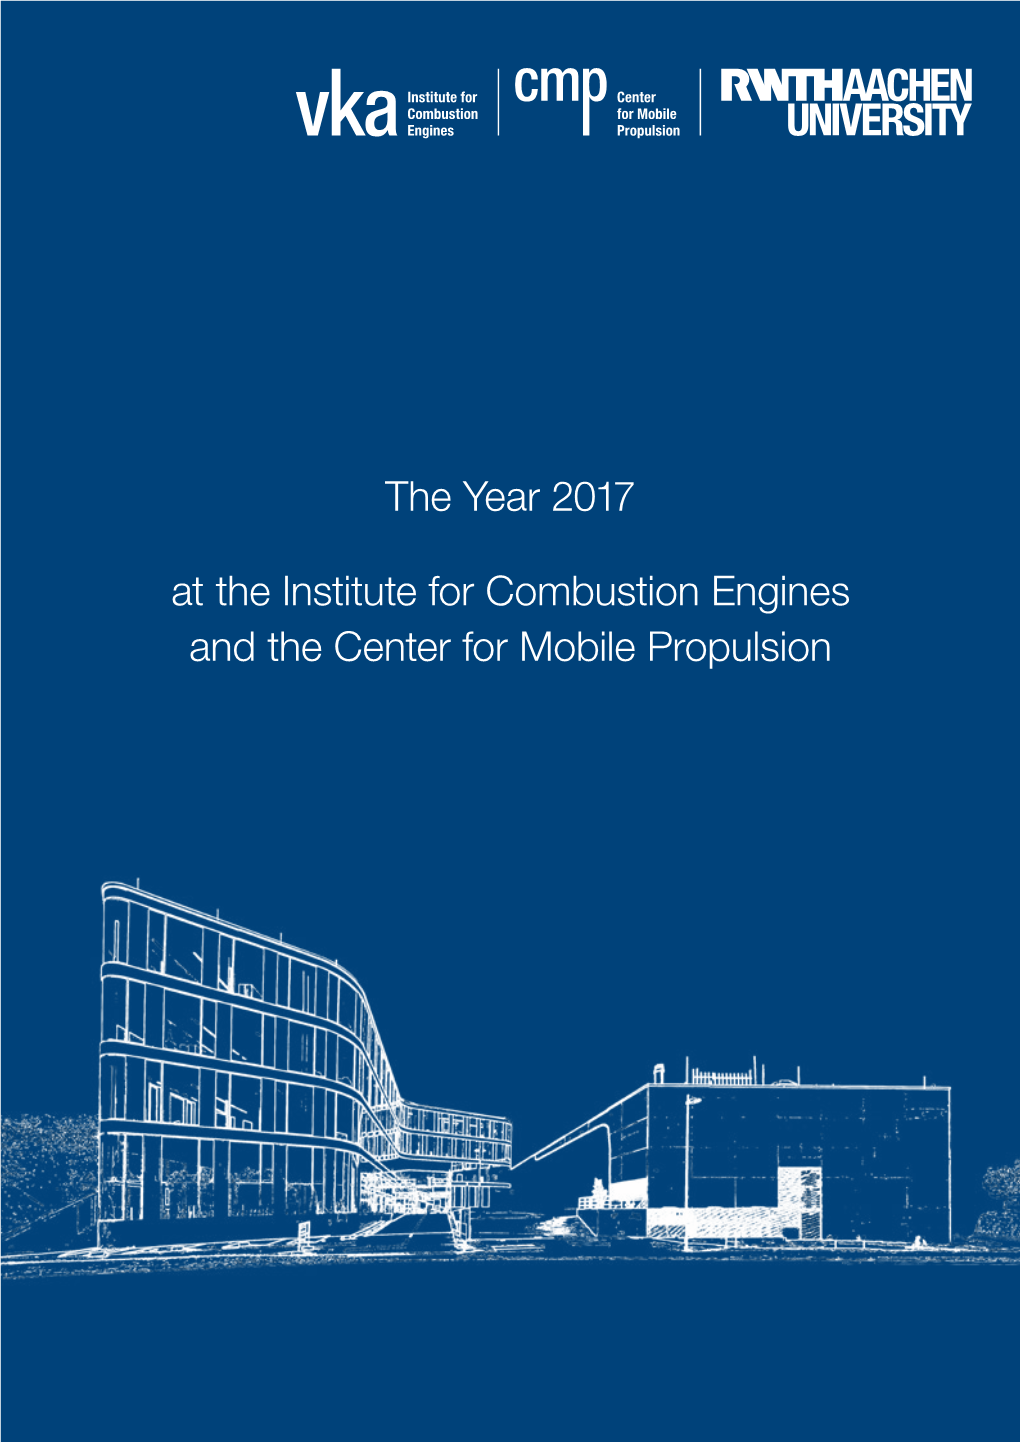 The Year 2017 at the Institute for Combustion Engines and The